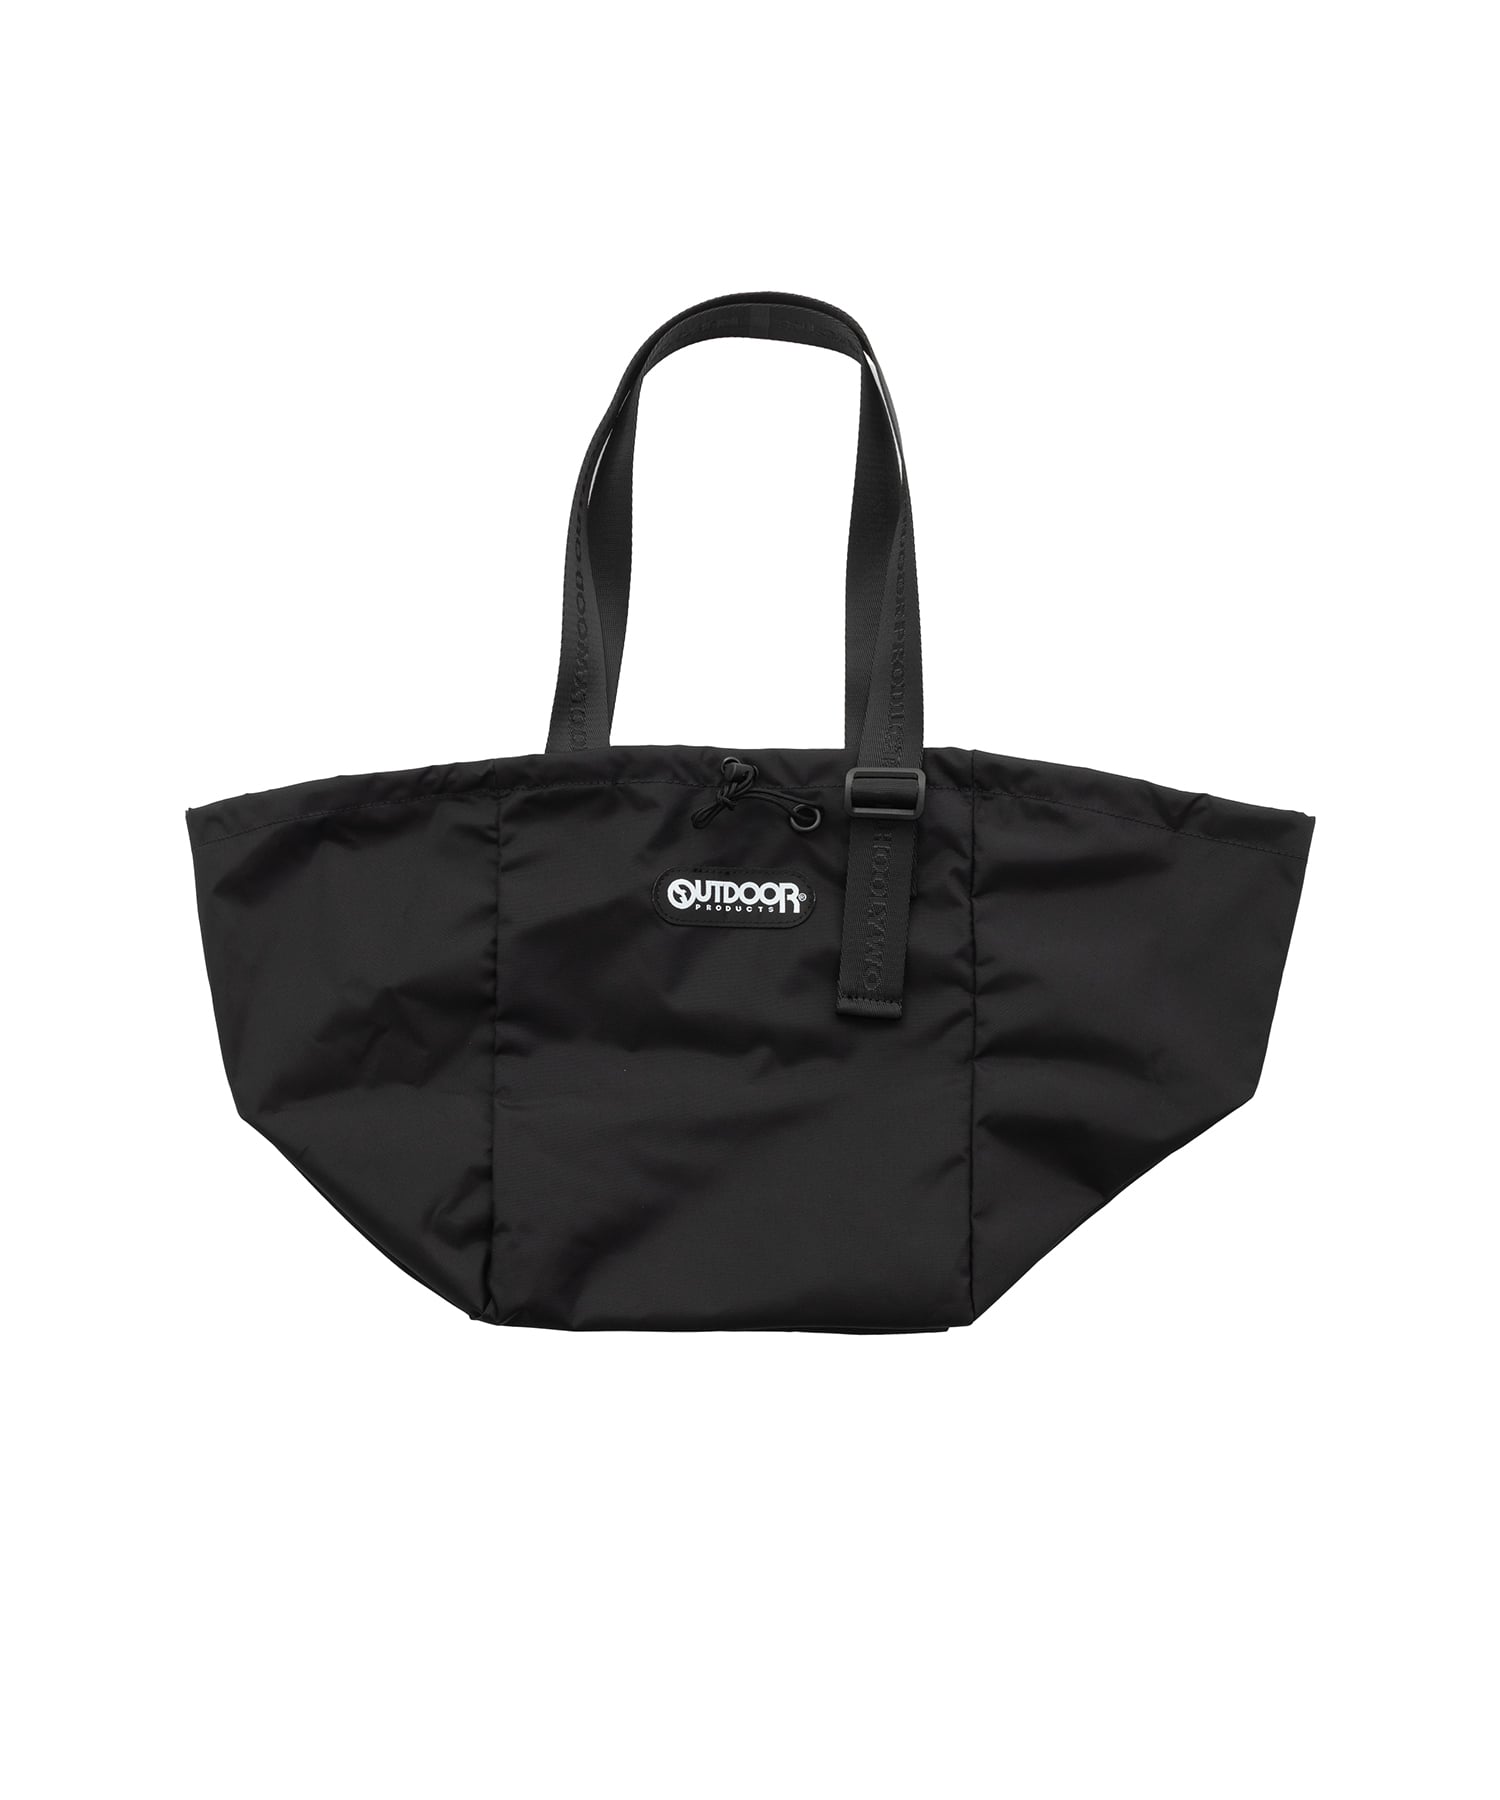 OUTDOOR PRODUCTS MINI TOTE BAG